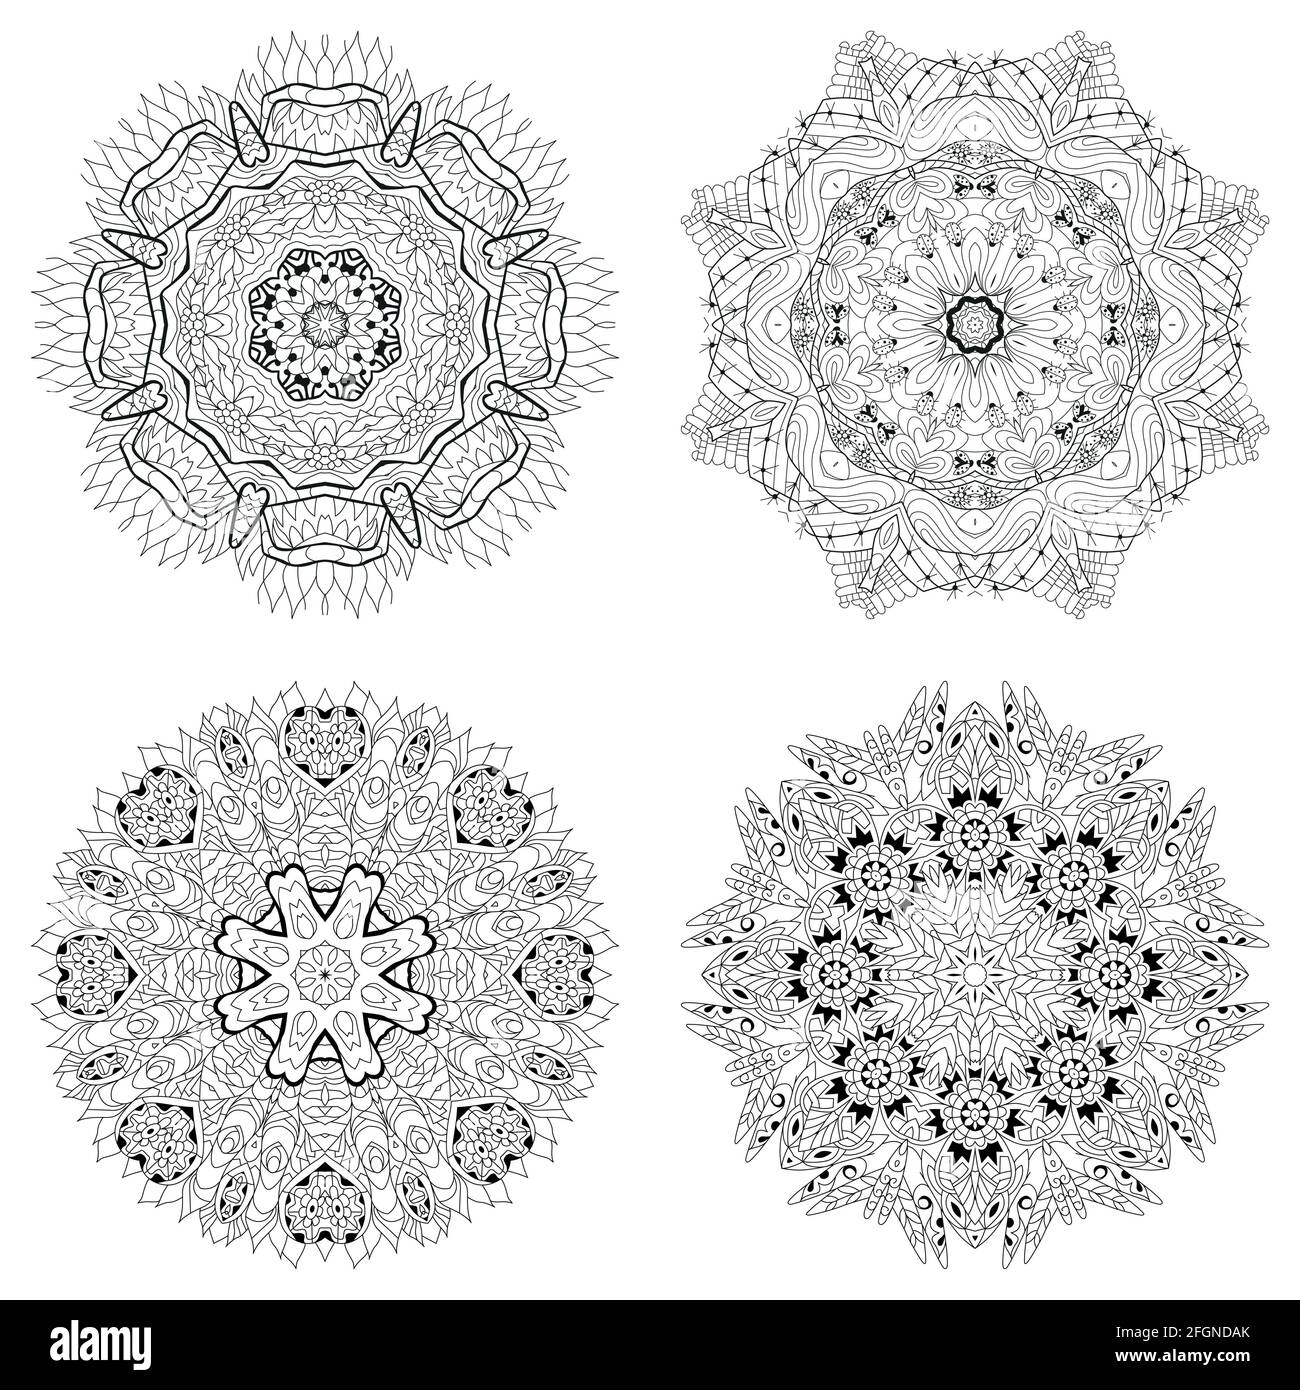 Vector Adult Coloring Book Textures. Hand-painted art design. Adult anti-stress coloring page. Black and white hand drawn illustration set of 4 mandal Stock Vector